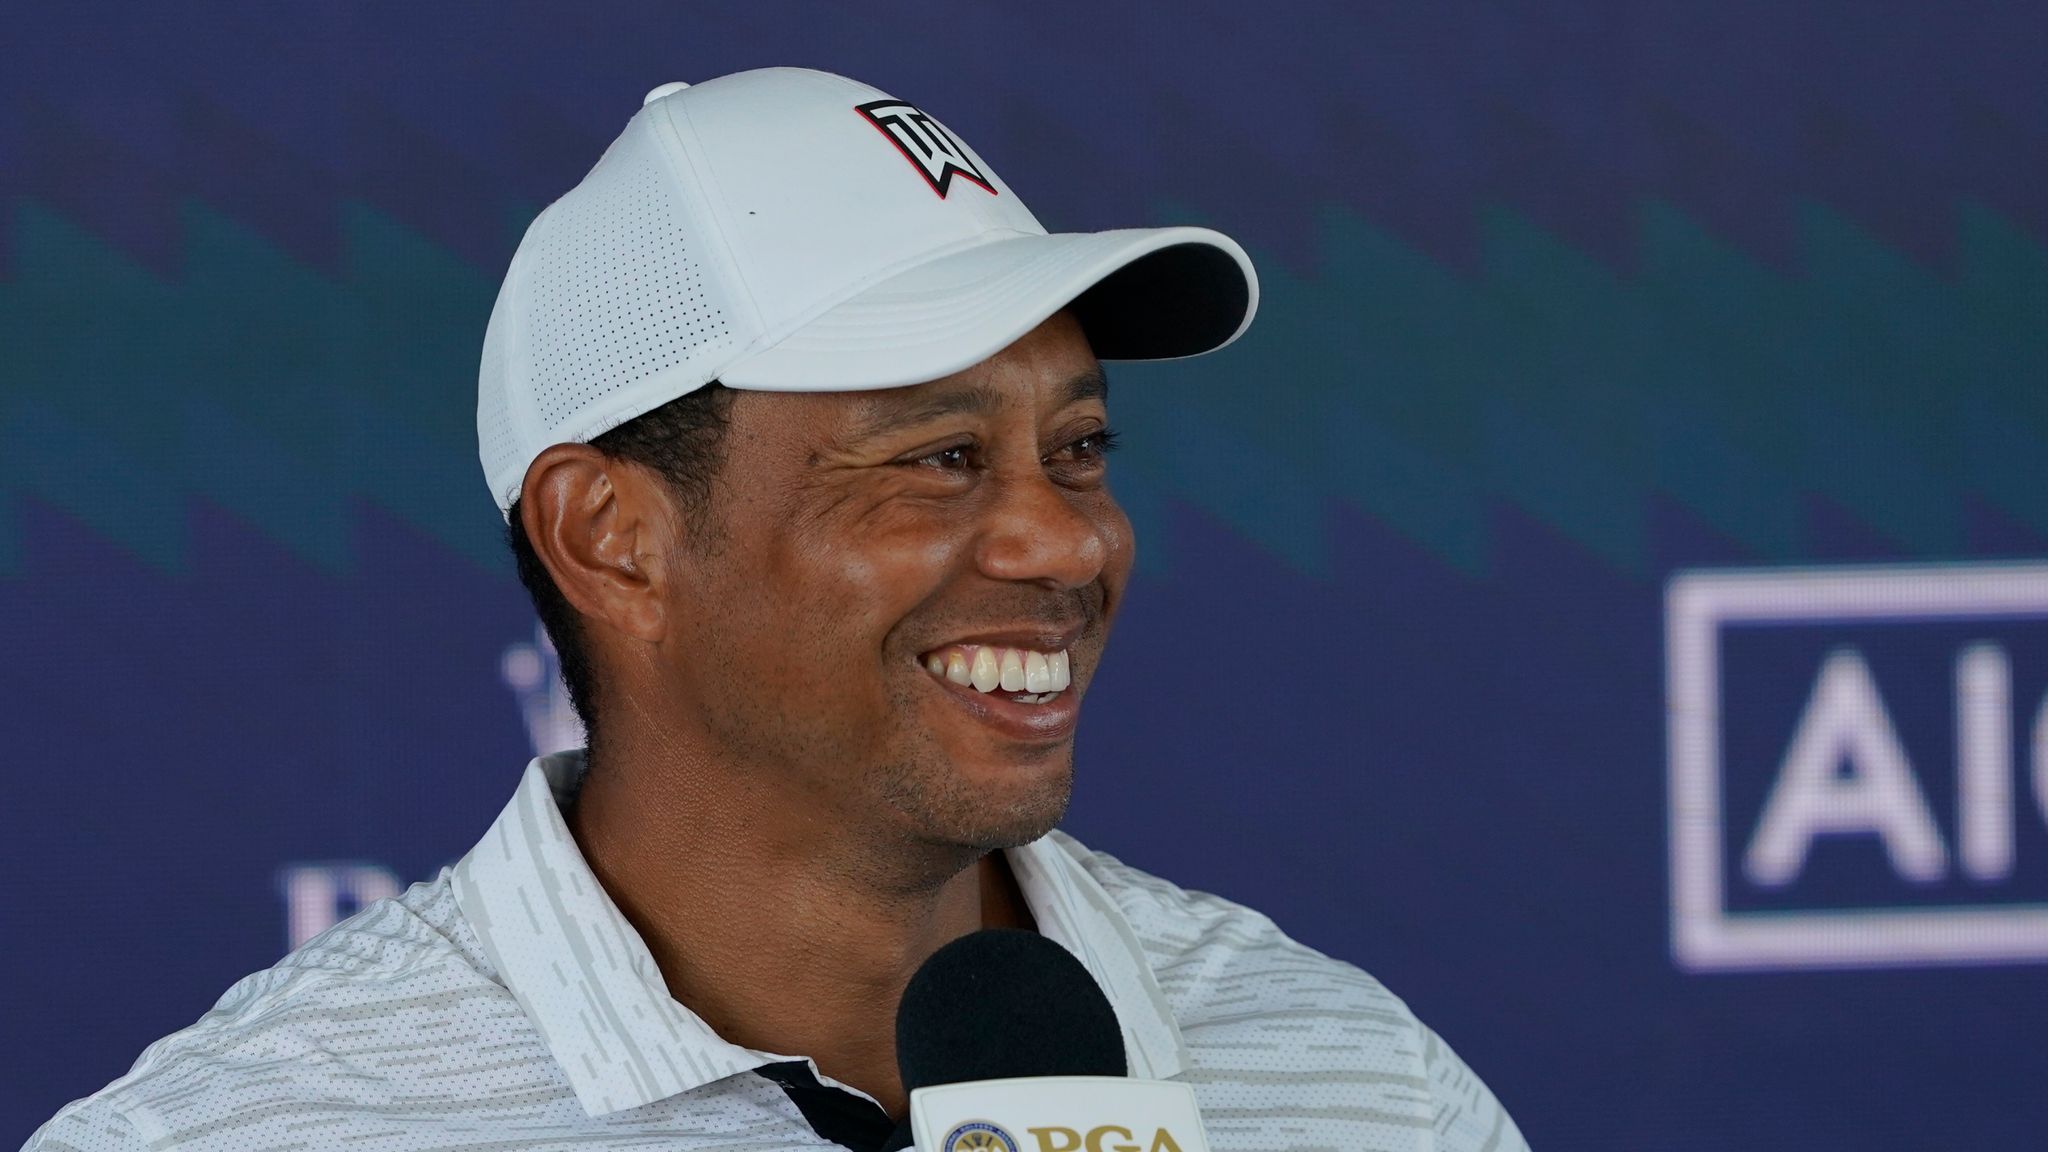 PGA Championship: After 74 in the first round, Tiger Woods laments his iron play and compliments Rory McIlroy